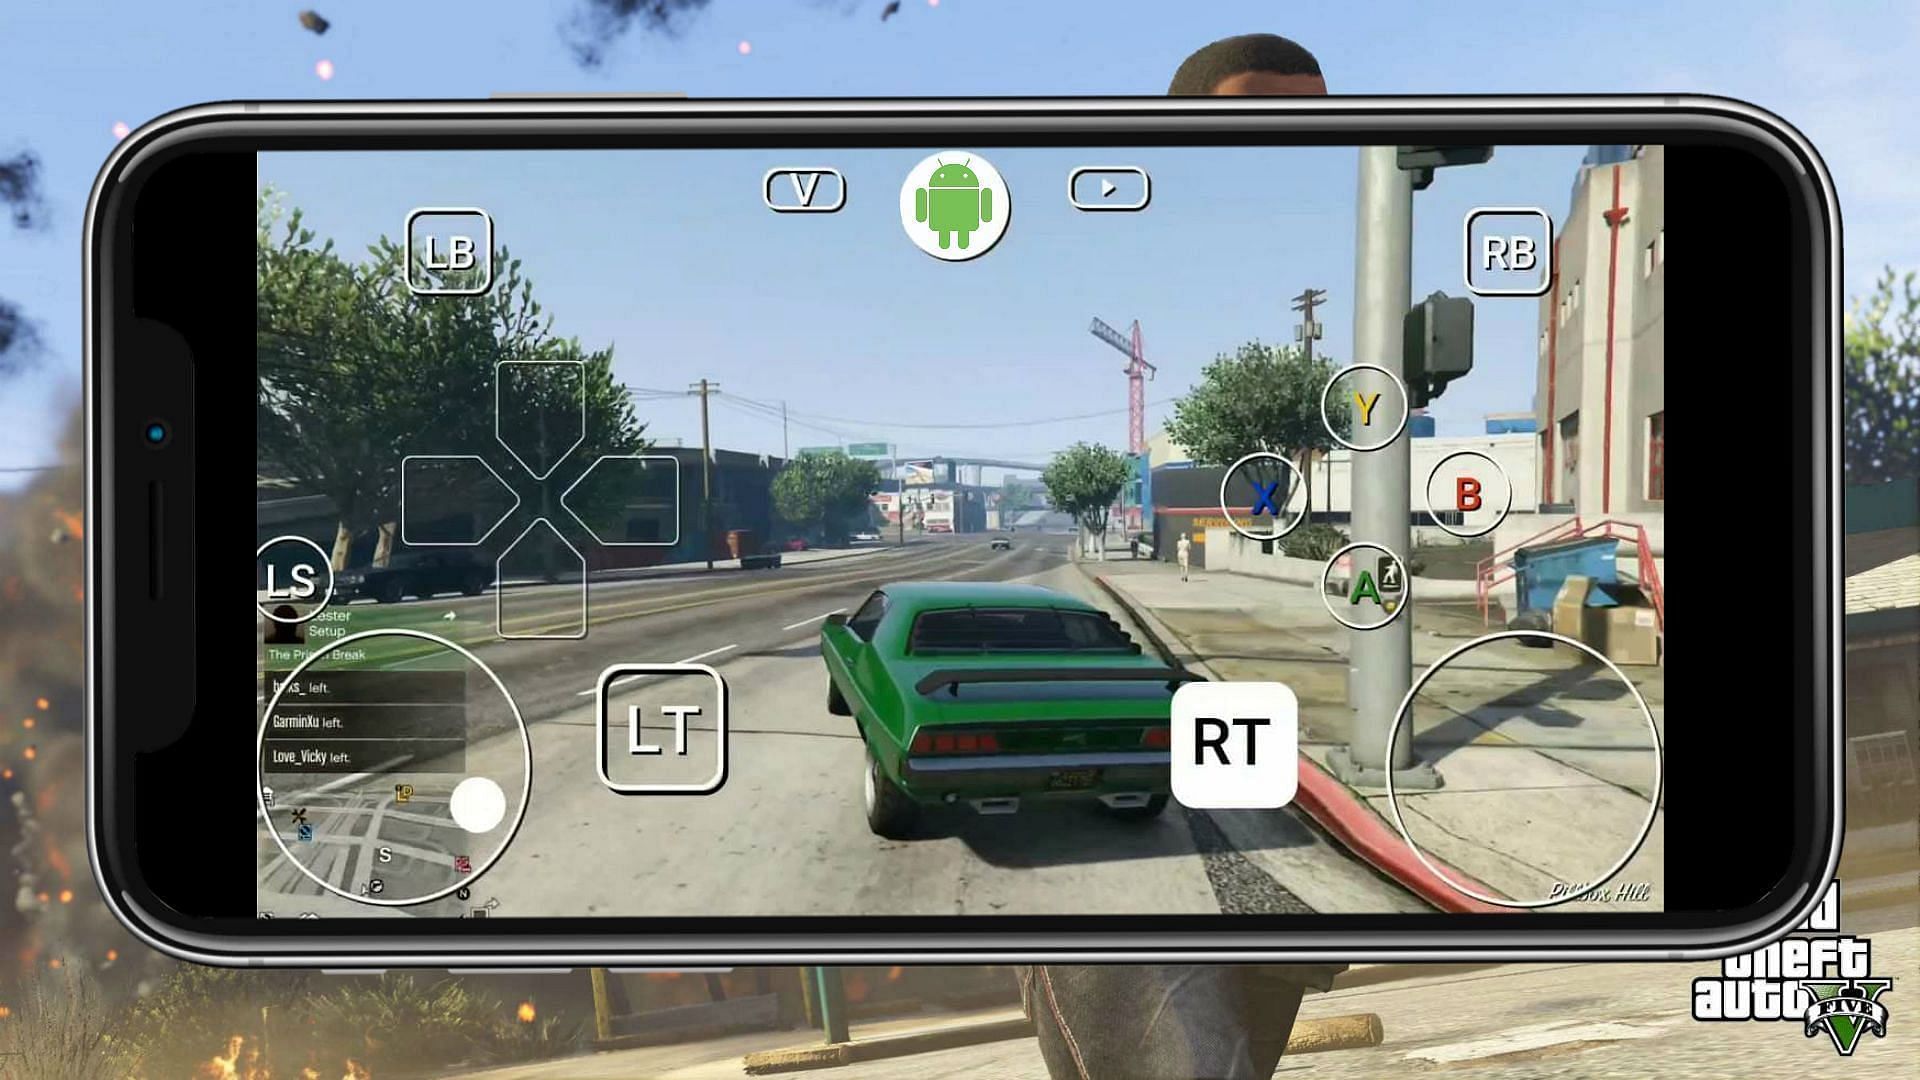 GTA 5 APK + OBB download links in 2023: Official mobile game or malicious  content?